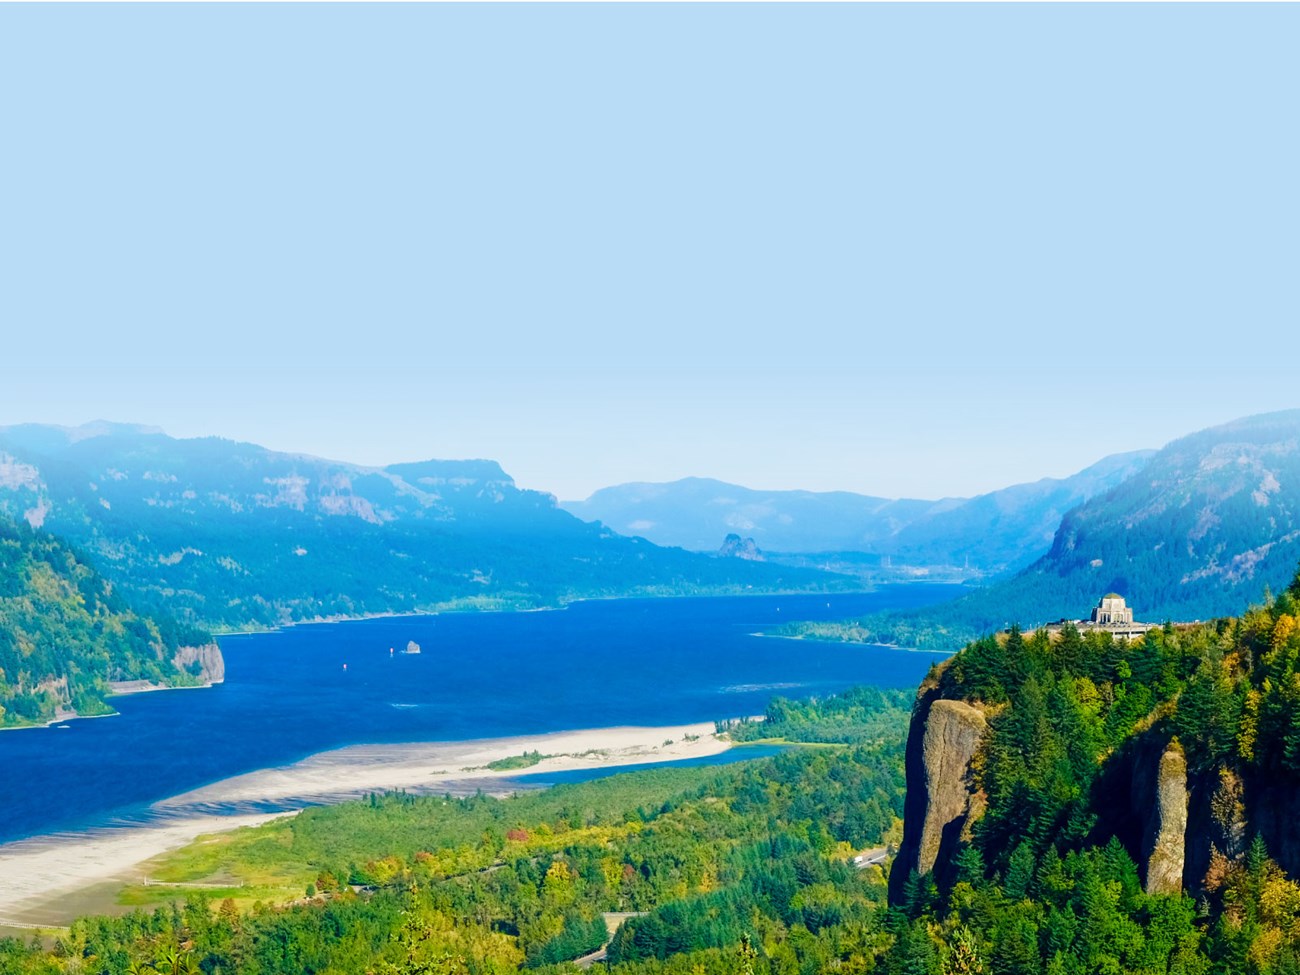 Vista house perches on a cliff in an iconic view of the Columbia River Valley in OR and WA.